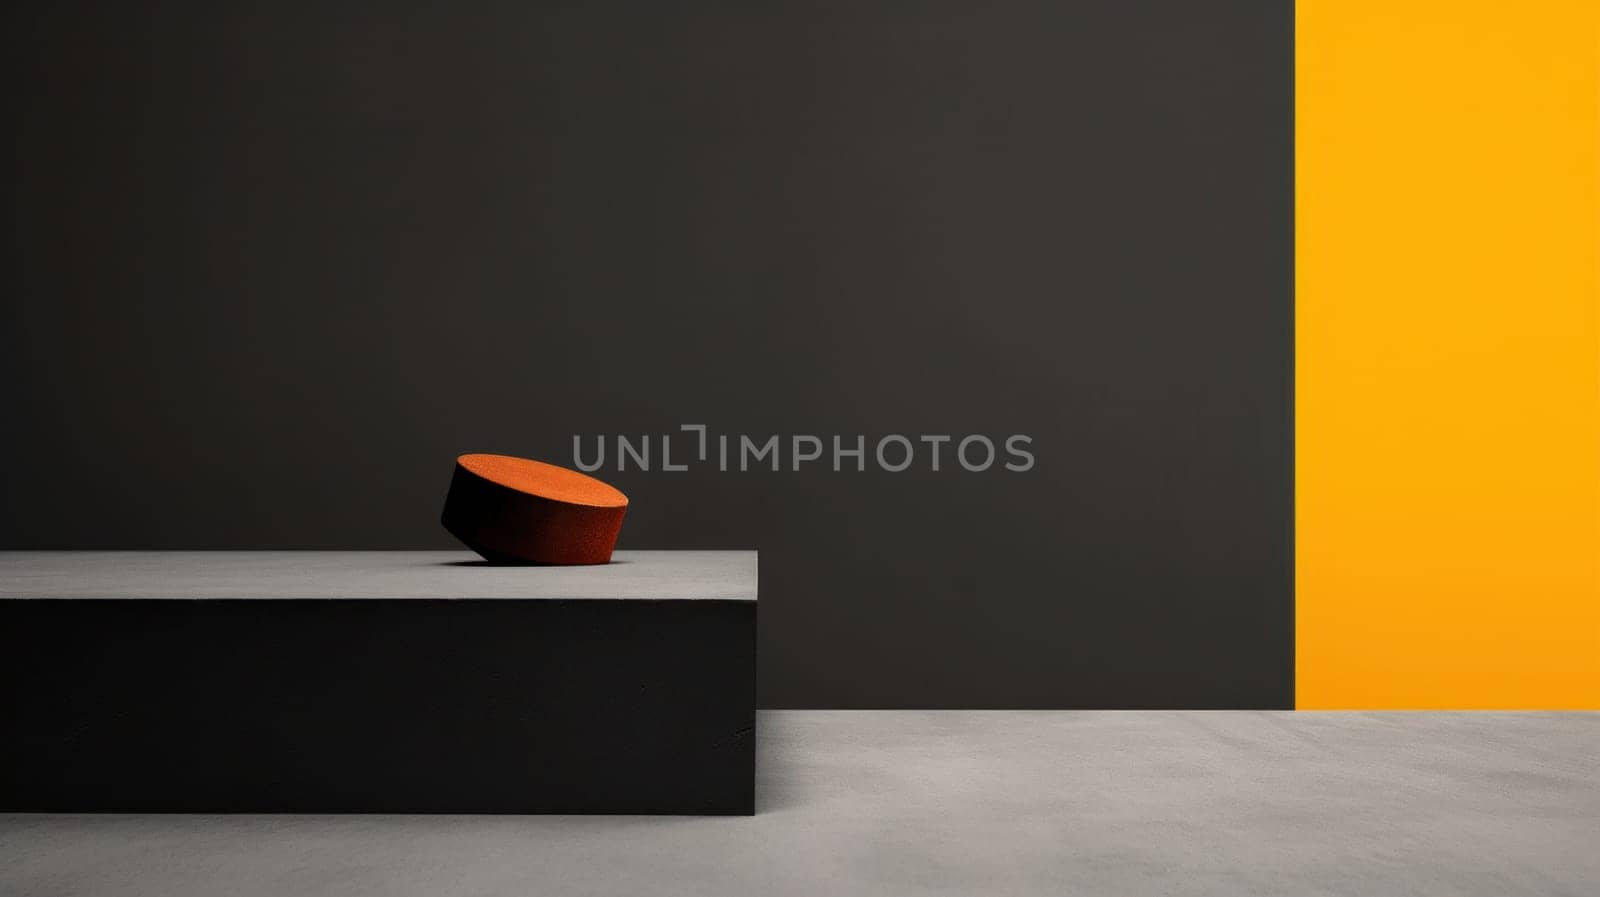 A red object sitting on a black and yellow wall